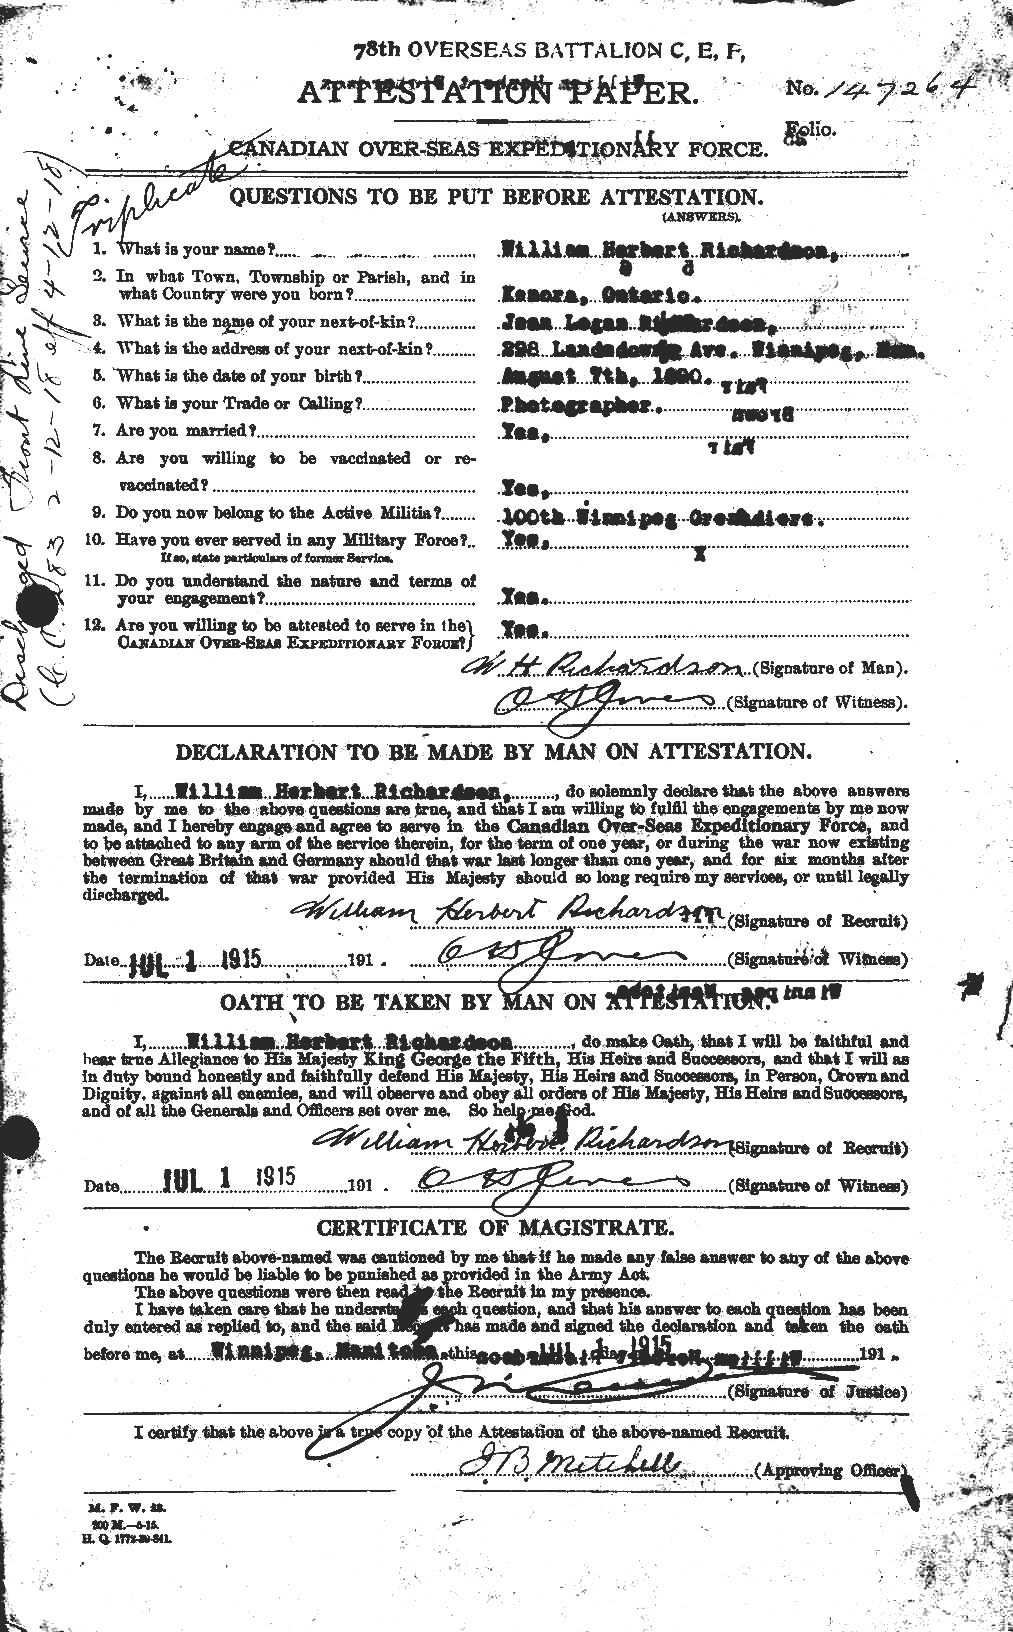 Personnel Records of the First World War - CEF 608581a